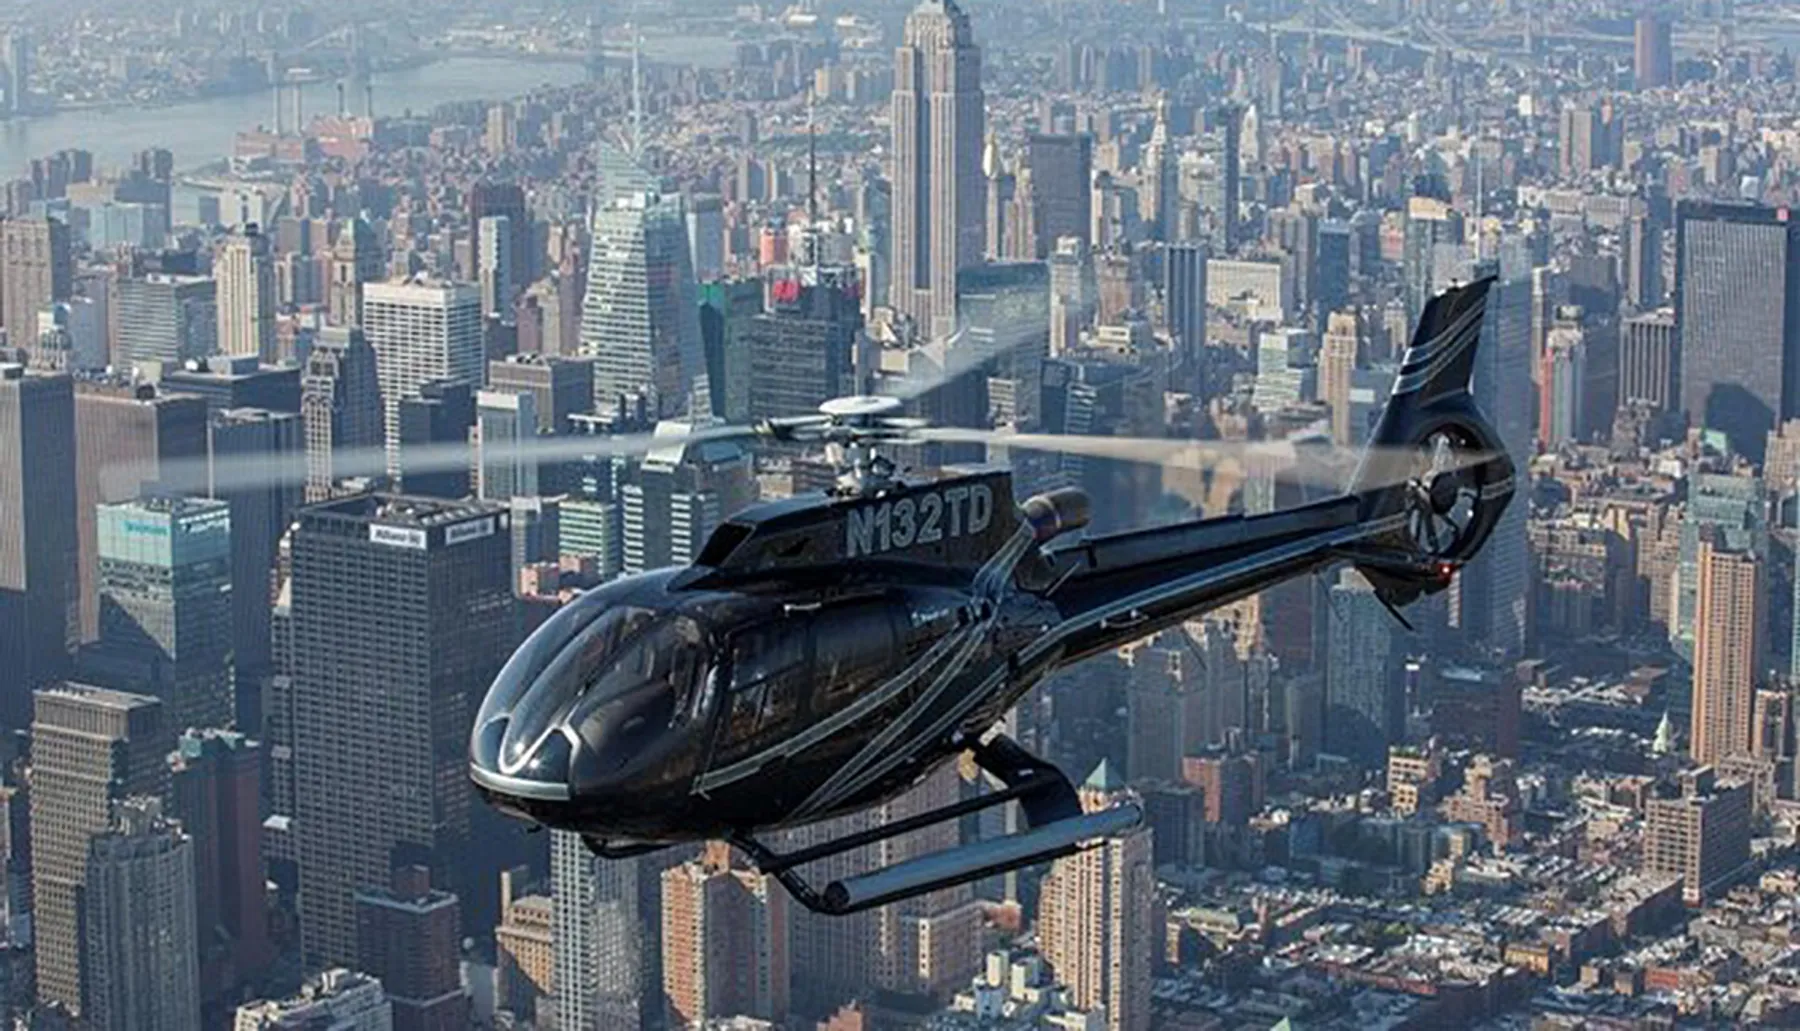 A helicopter is flying over a densely built urban area, showcasing a city's skyline in the background.